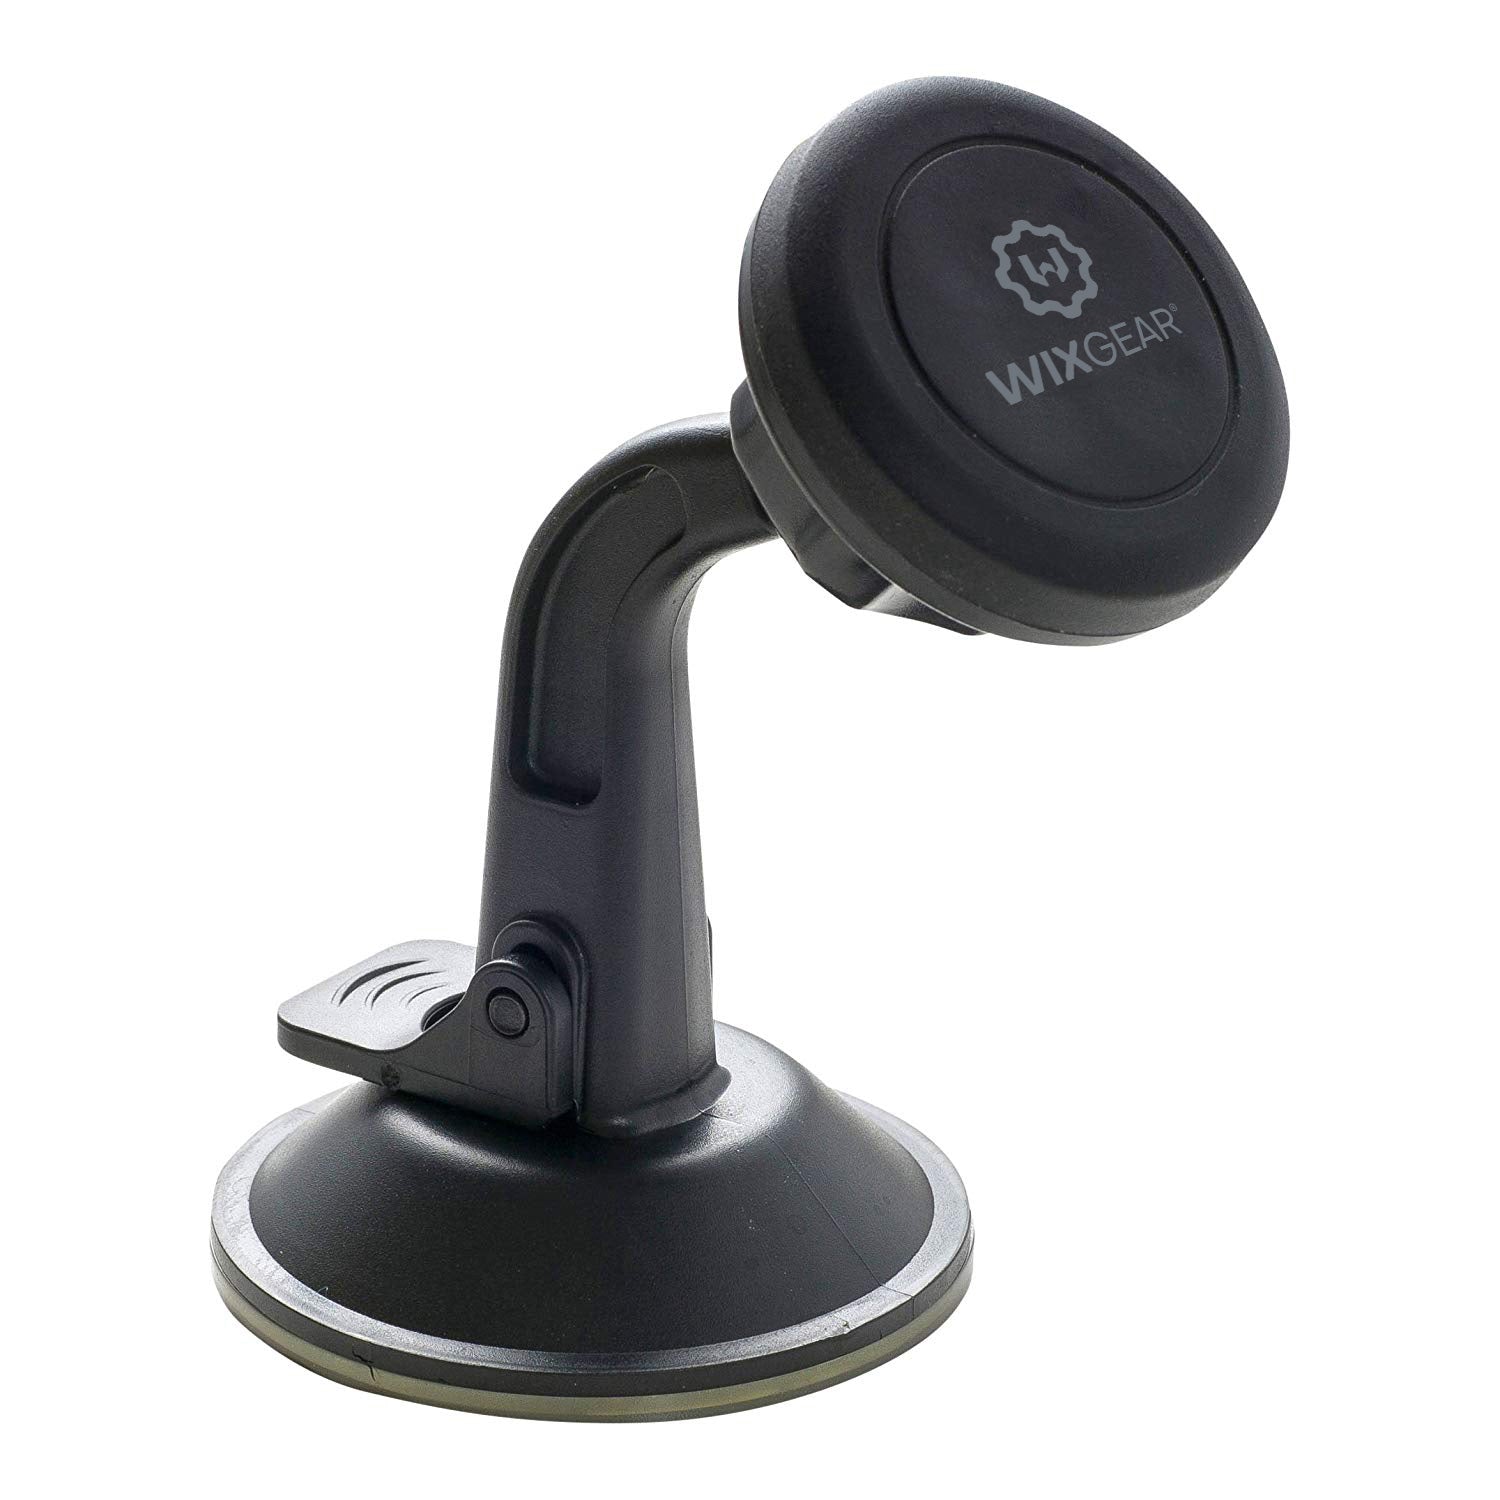 WixGear Universal Magnetic Car Mount Holder, Windshield Mount and Dashboard Mount Holder for Cell Phones